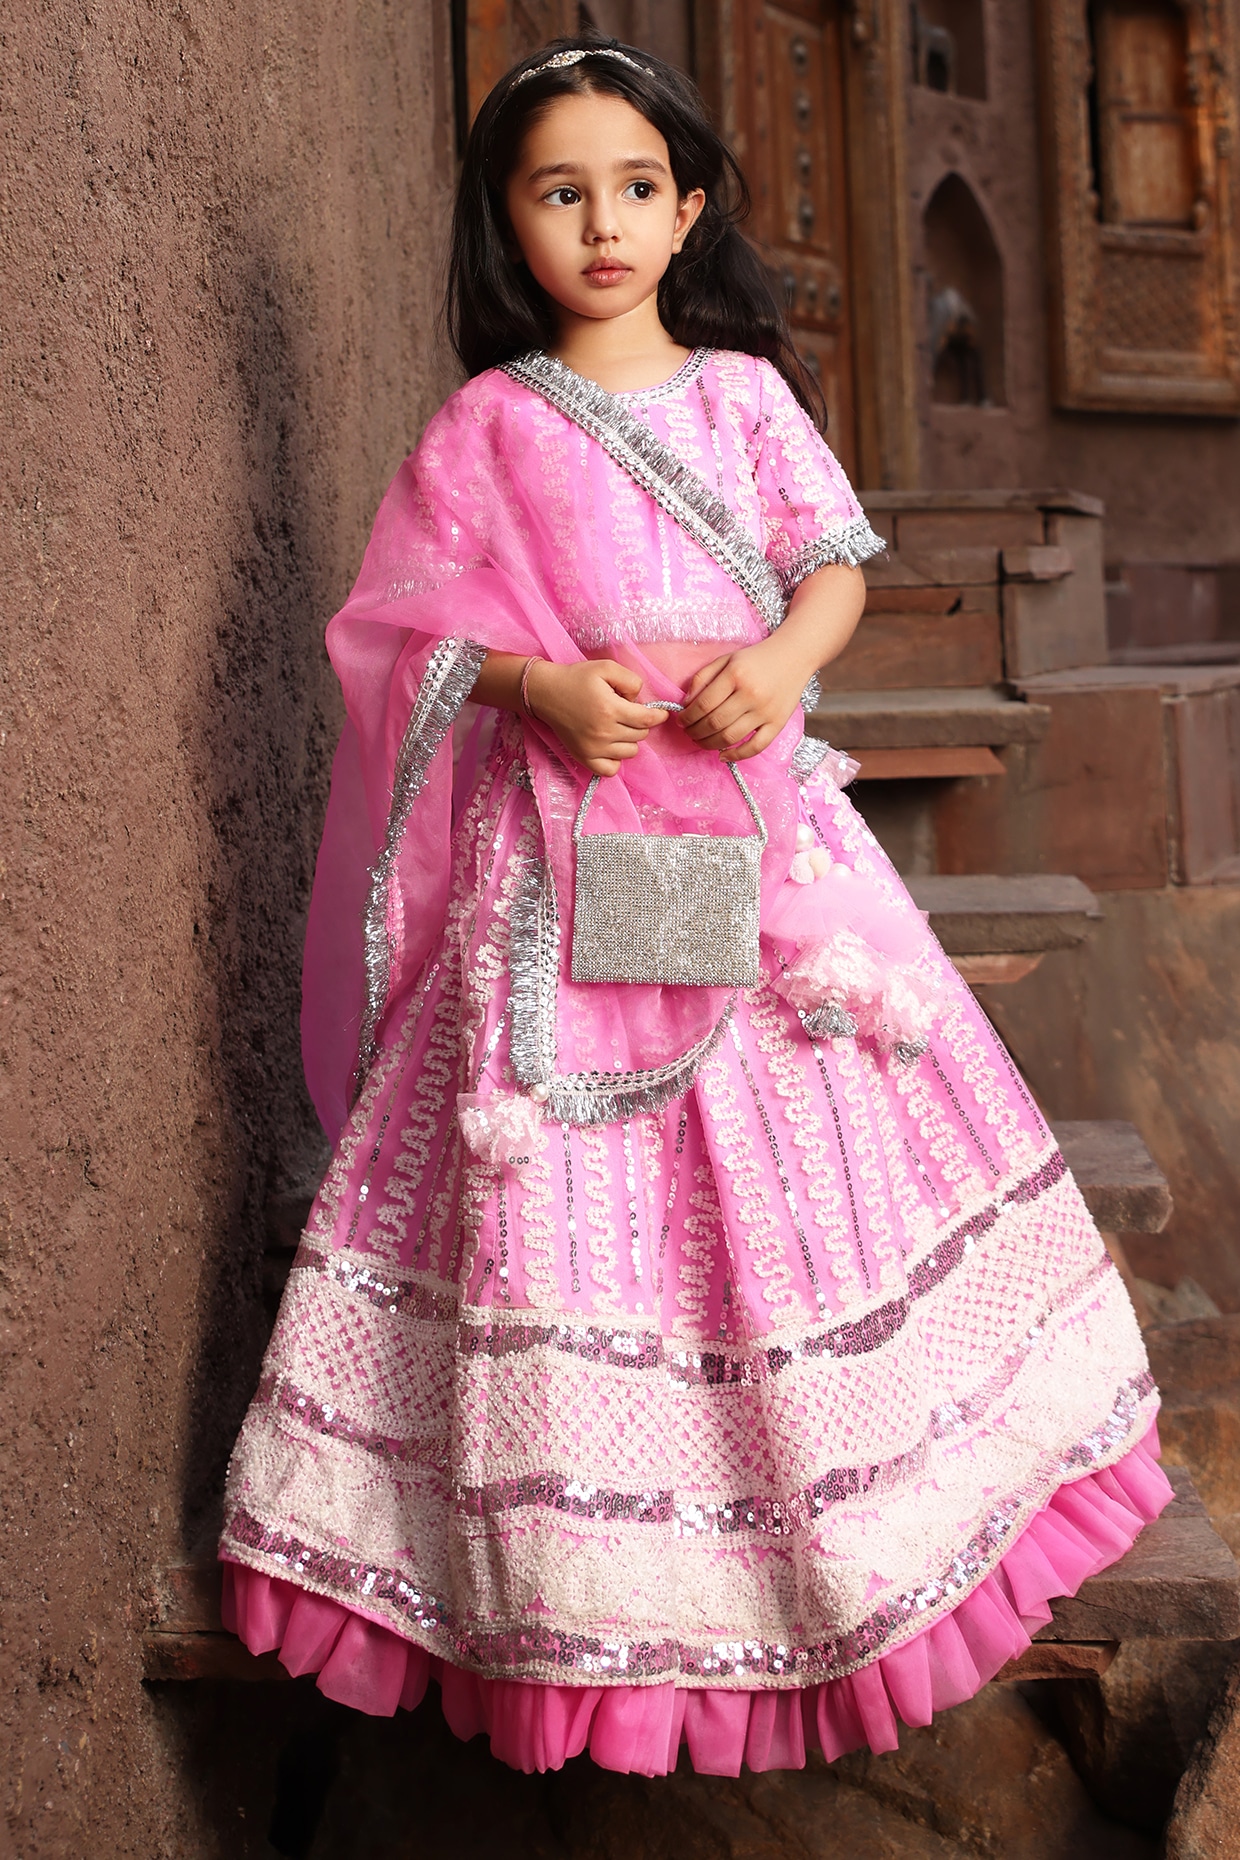 Lata girls ethnic wear top and lehenga skirt coord in purple handwoven –  Love the world today